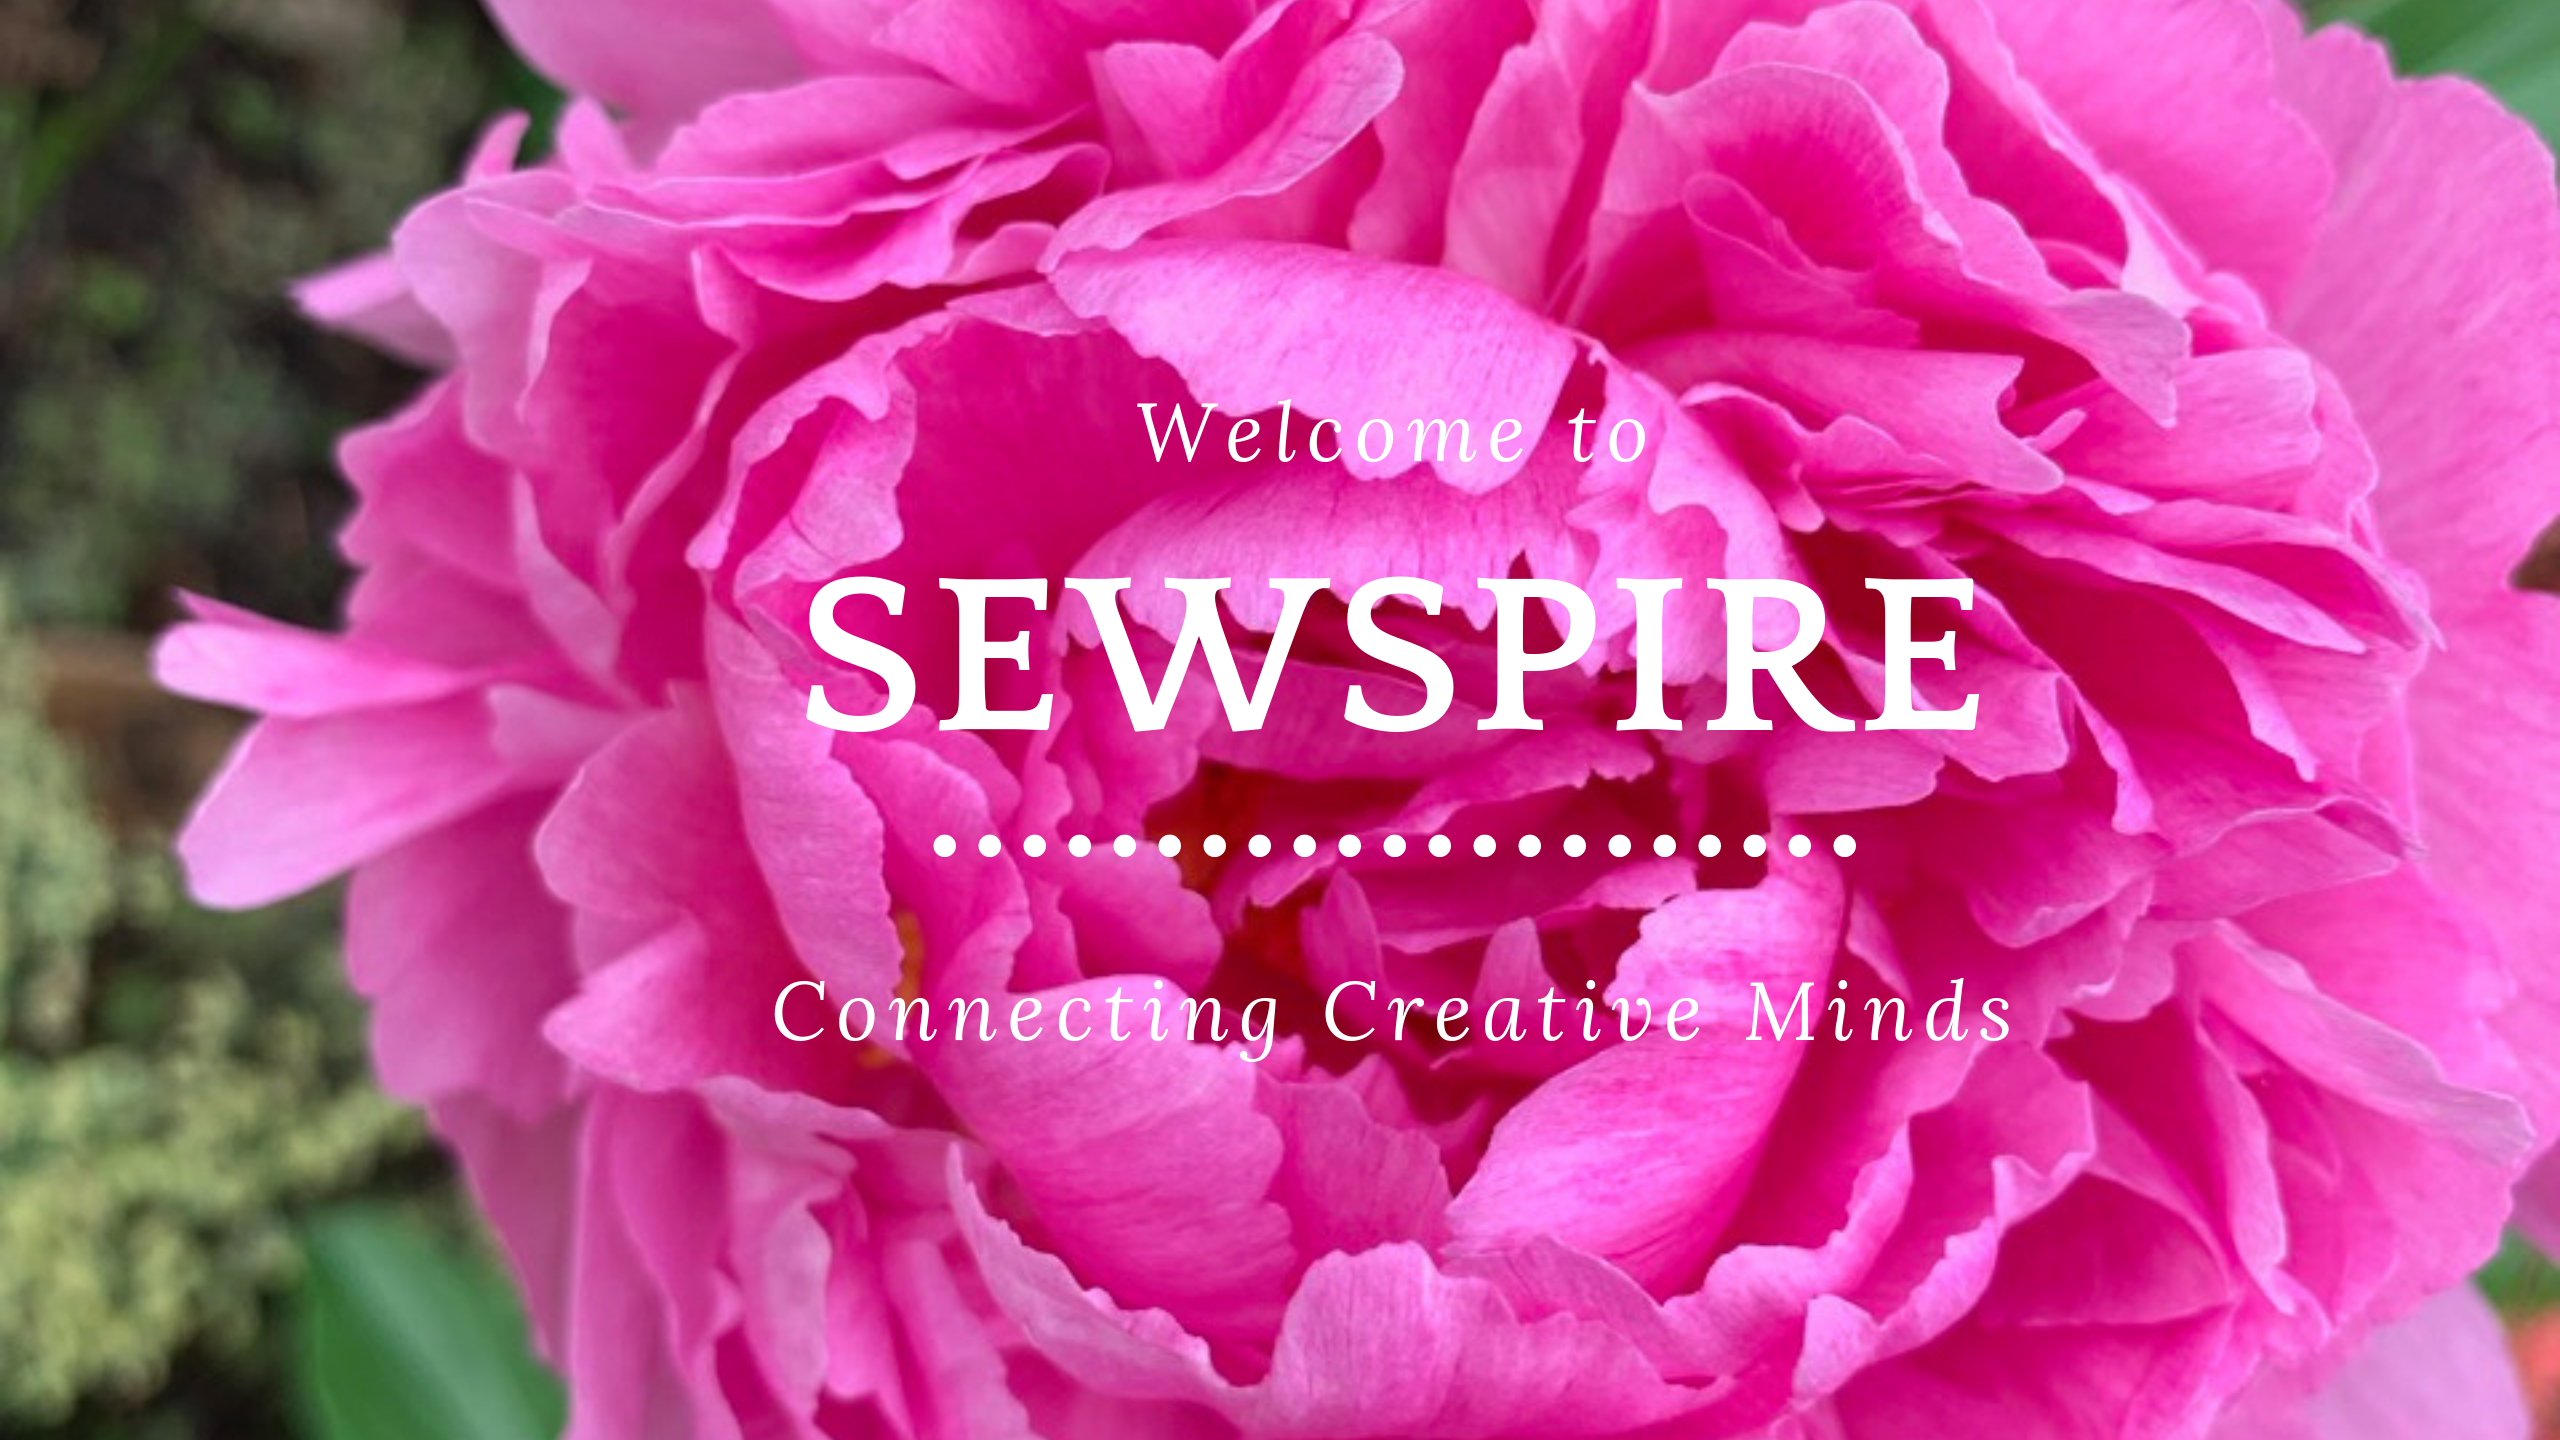 Welcome to Sewspire Connecting Creative Minds